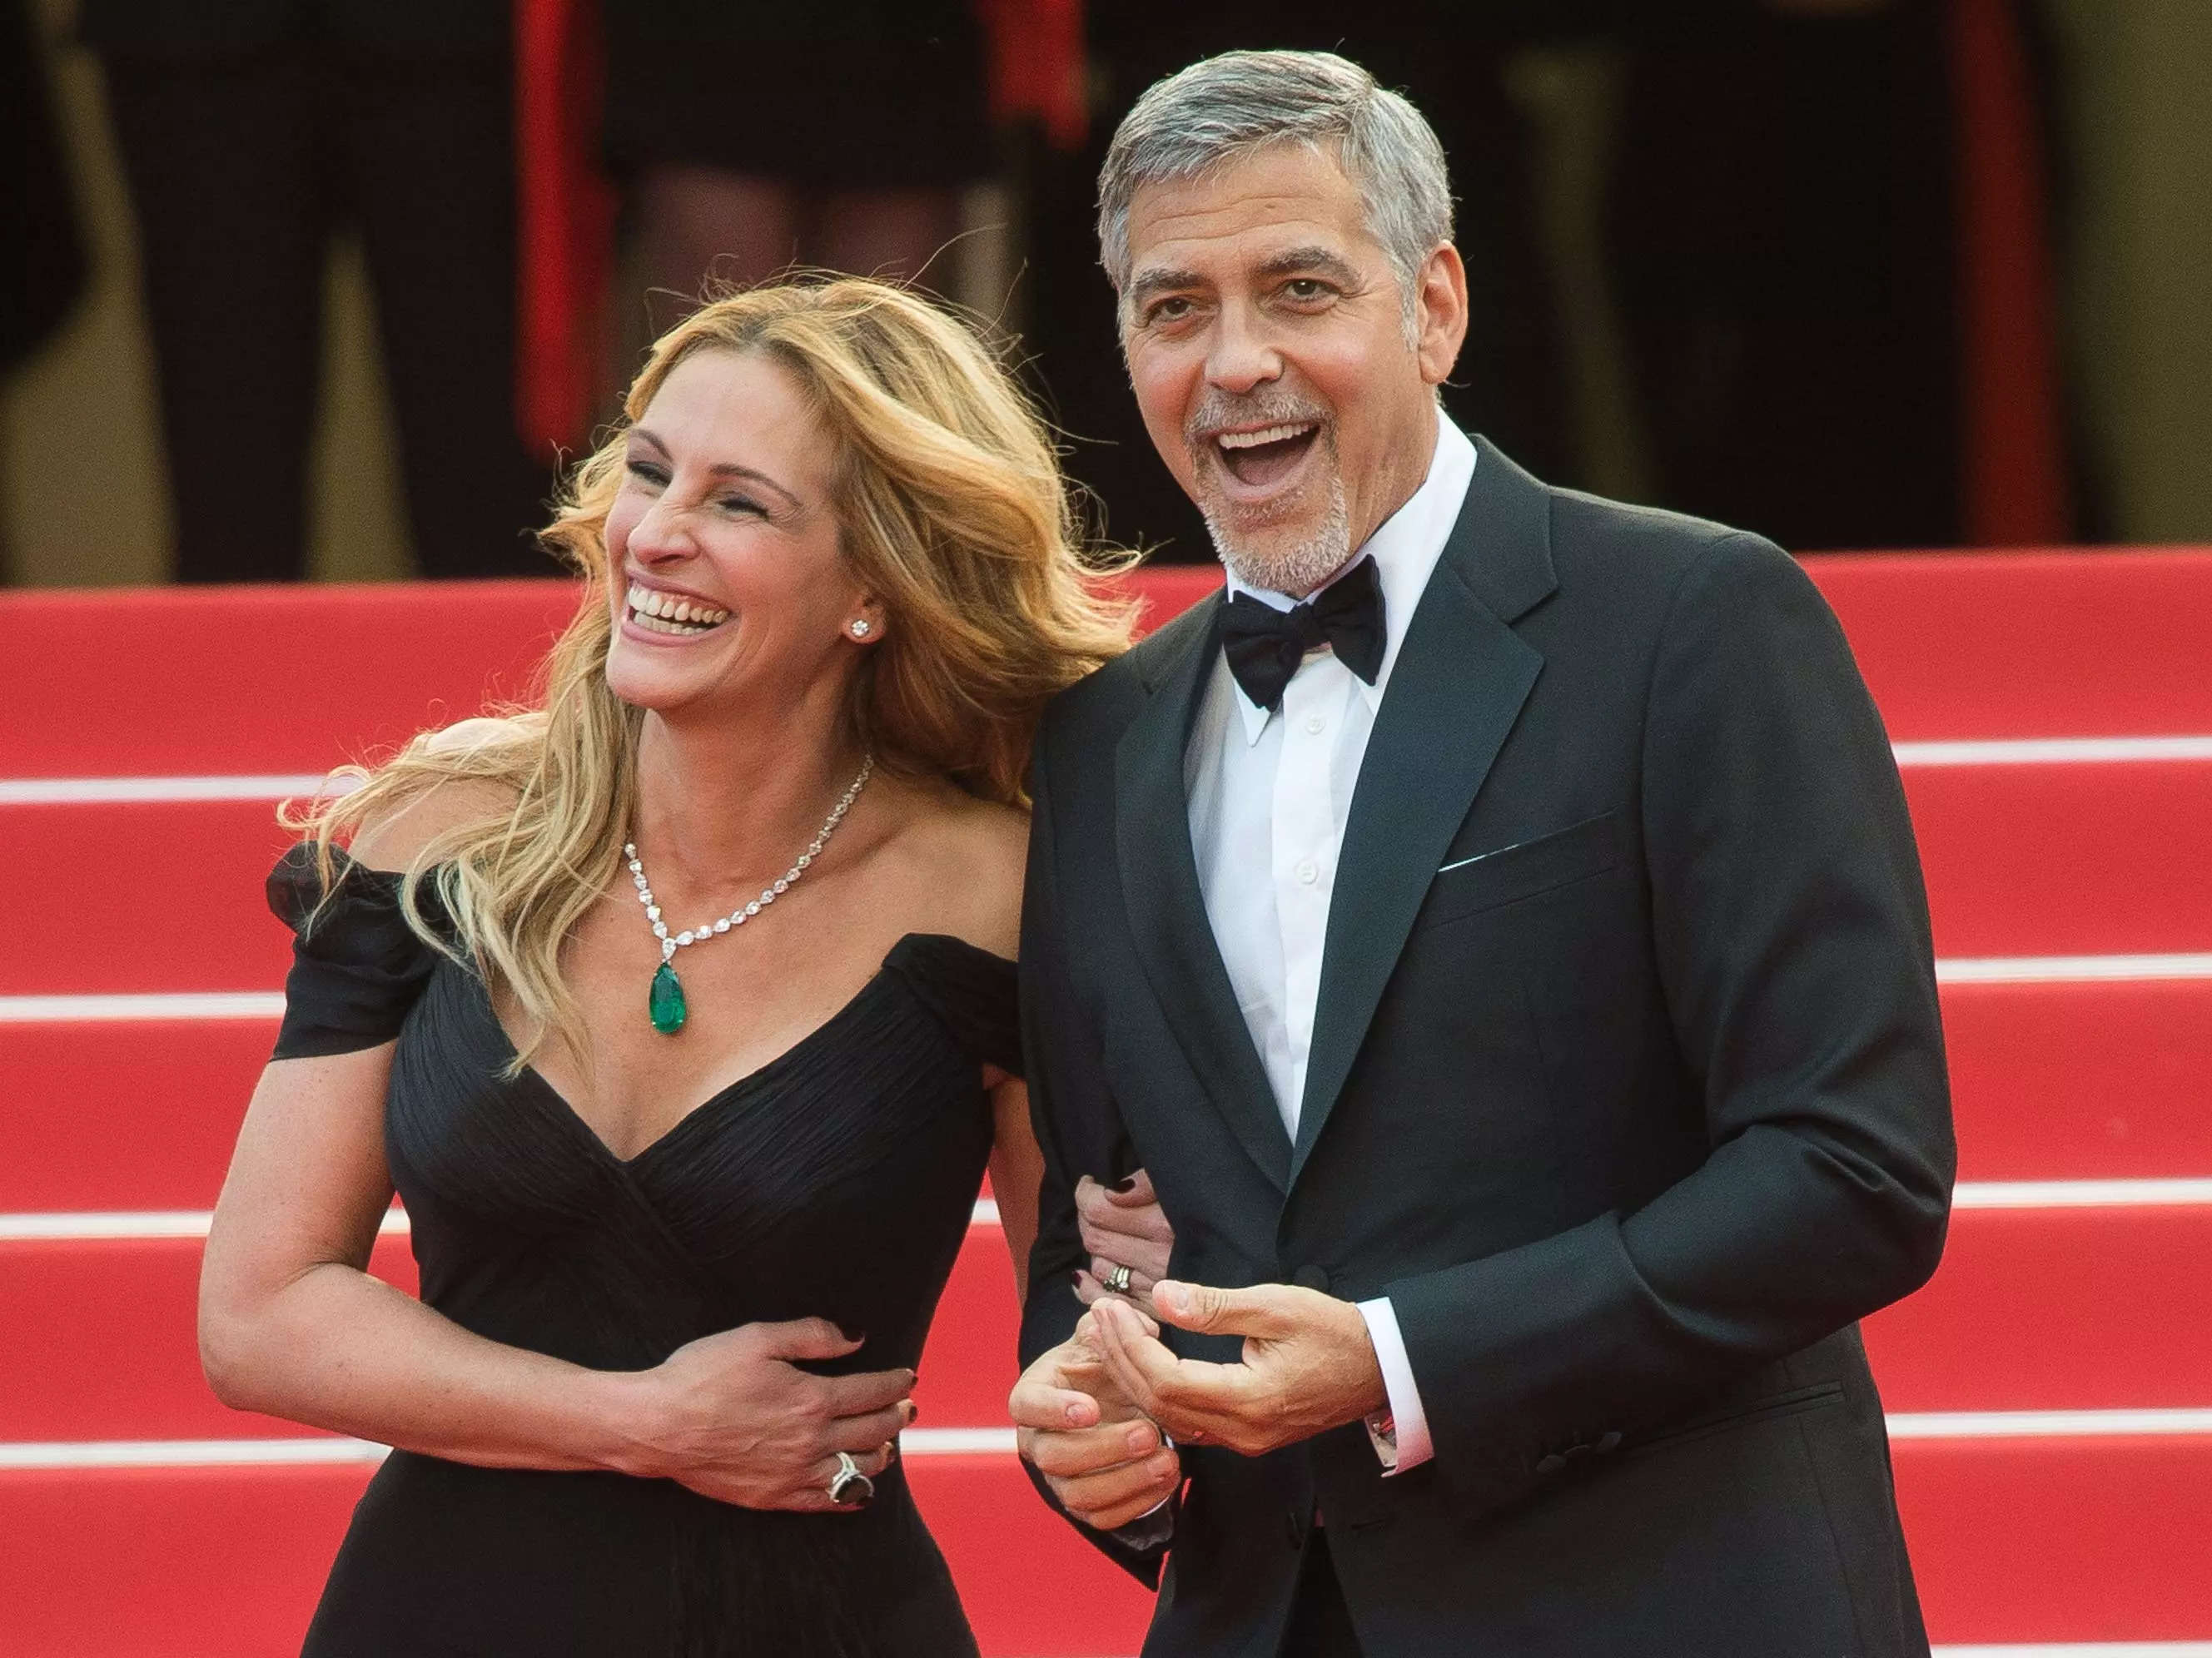 https://www.businessinsider.in/photo/94926822/julia-roberts-and-george-clooney-admit-their-improvised-insults-went-too-far-in-their-new-rom-com-ticket-to-paradise.jpg?imgsize=343536